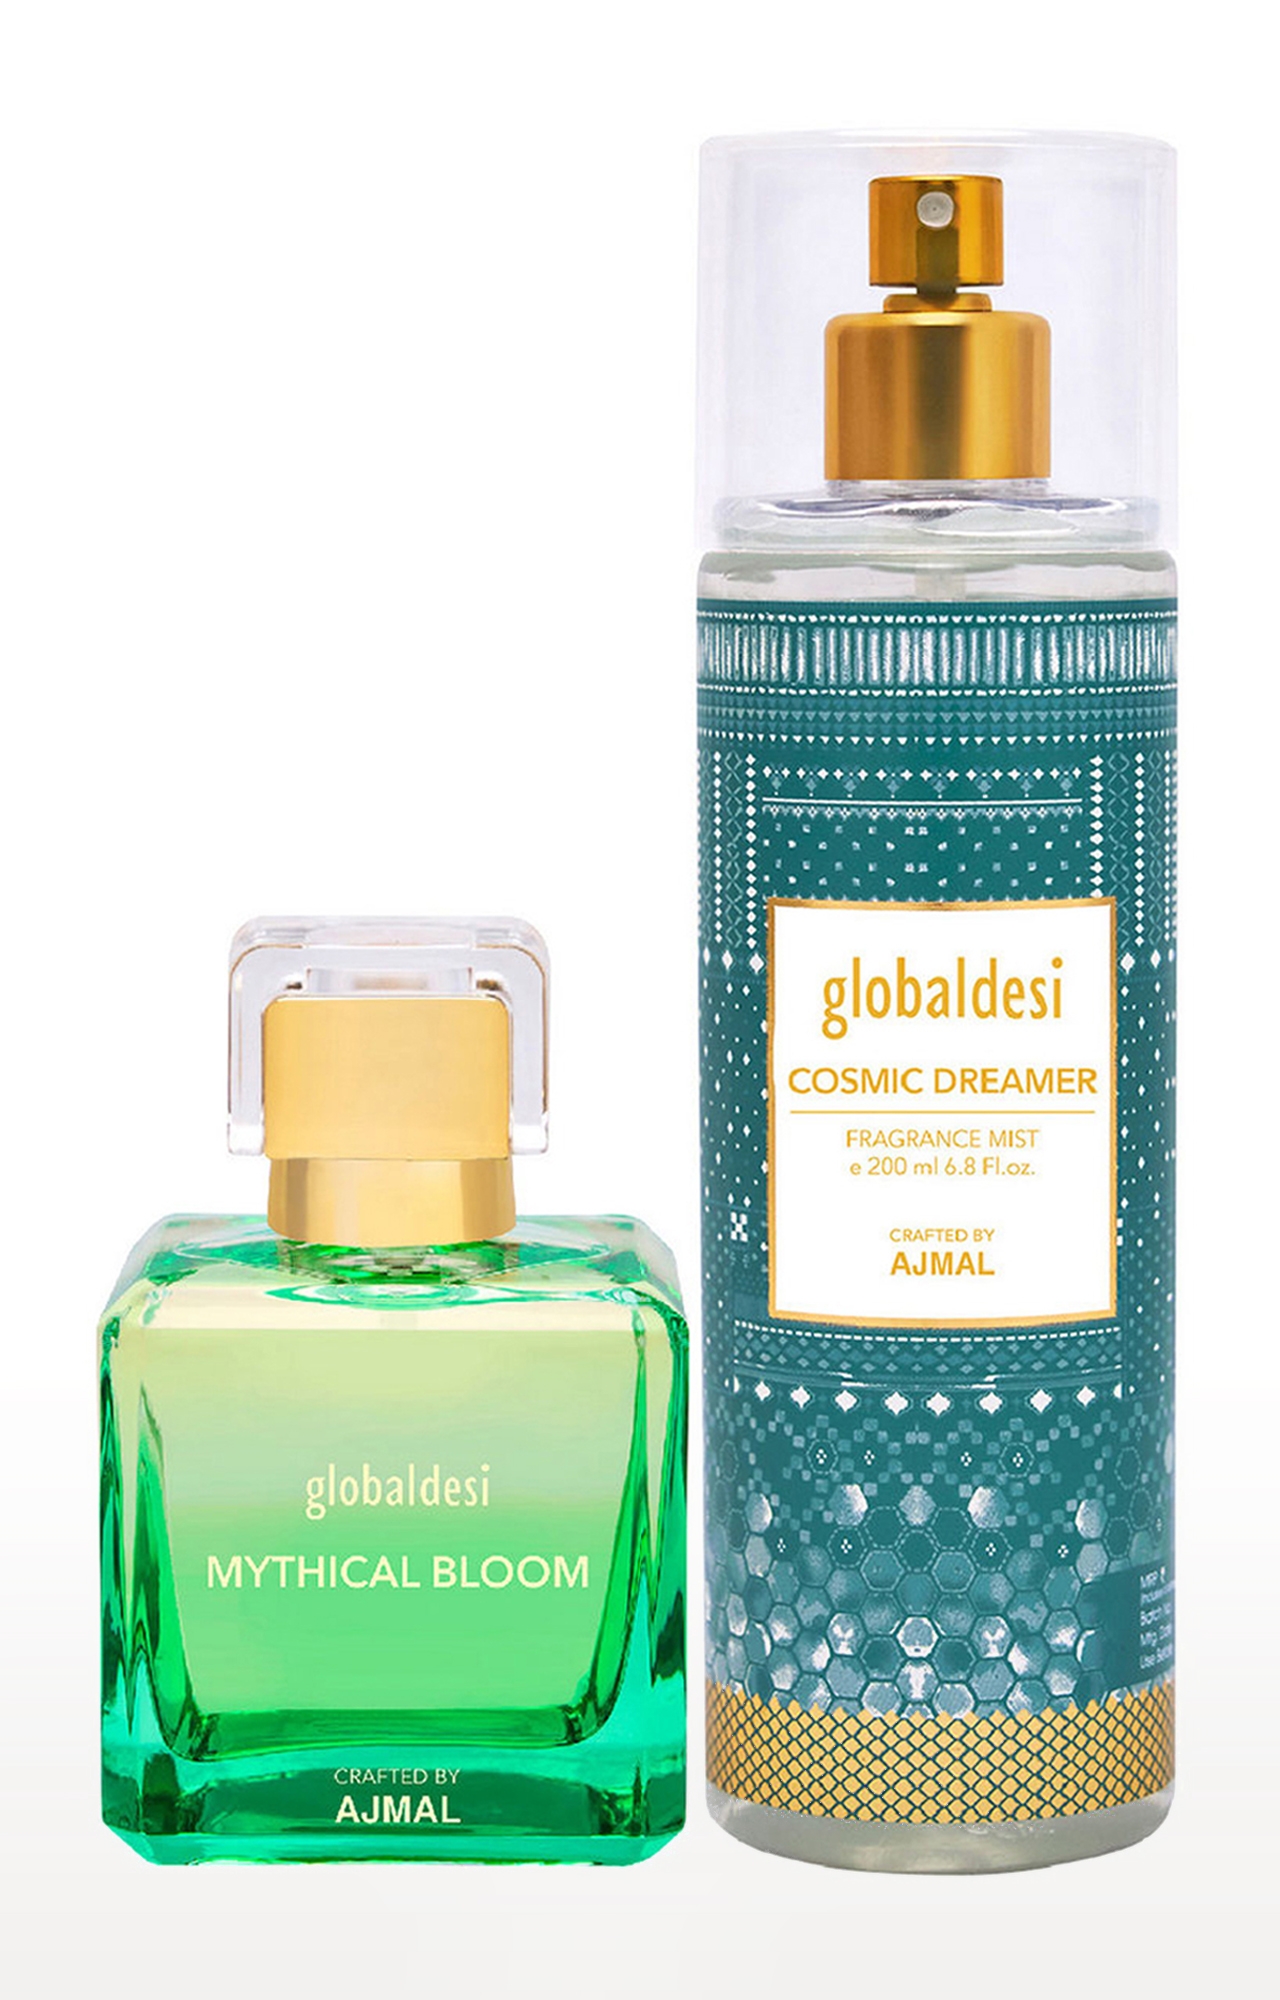 Global Mythical Bloom Eau De Parfum 100ML & Cosmic Dreamer Body Mist 200ML Pack of 2 for Women Crafted by Ajmal 